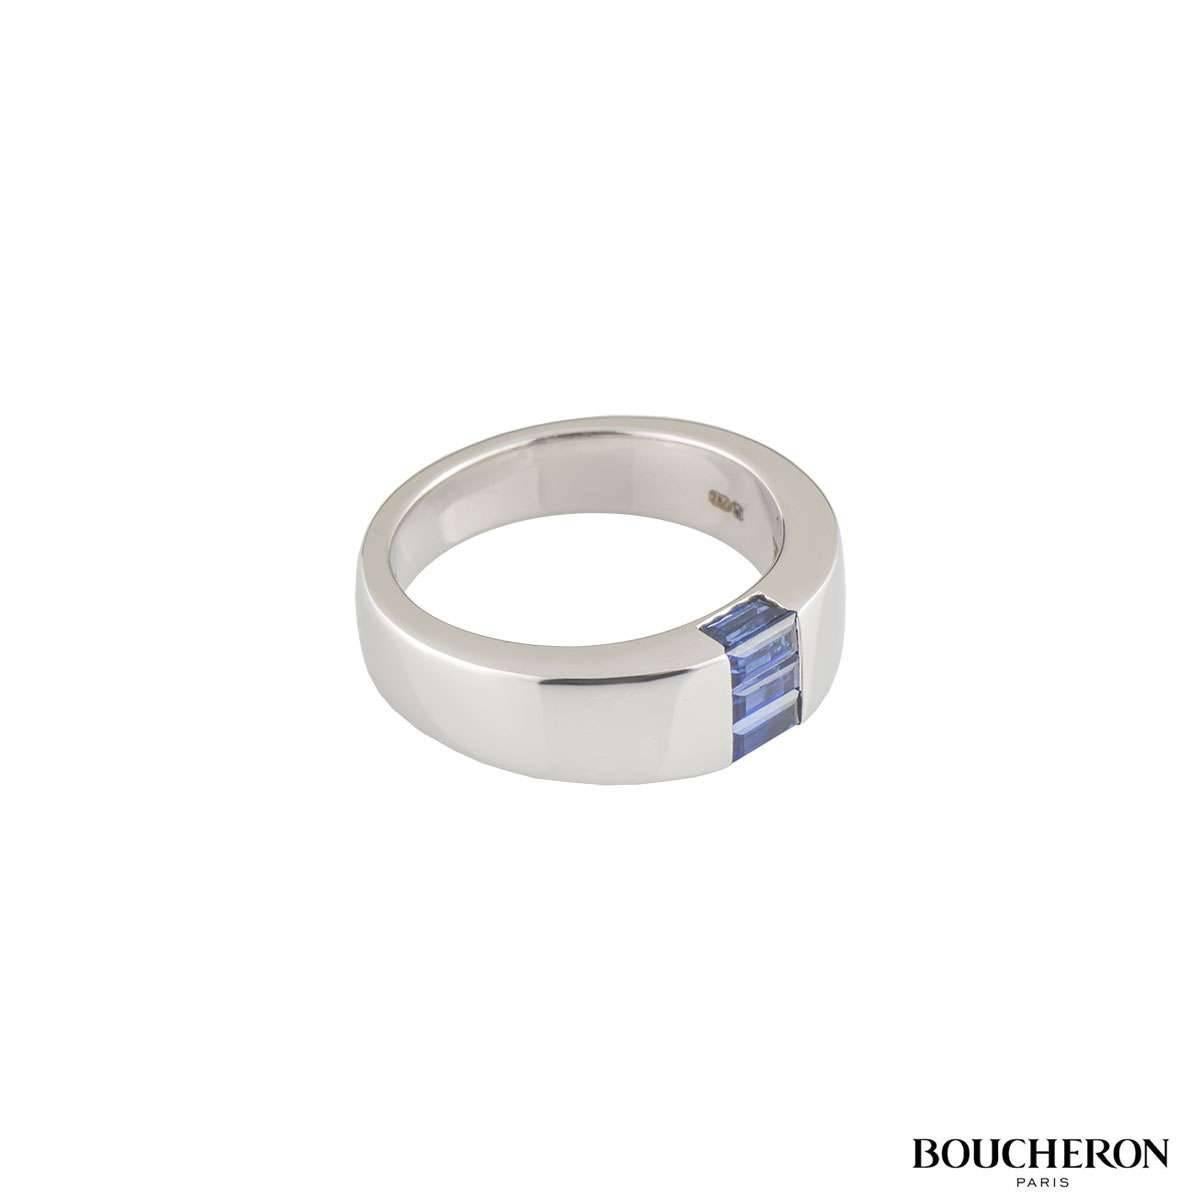 An 18k white gold sapphire ring from the Malice collection by Boucheron. The ring is set to the front with 5 baguette cut sapphires in a tension setting with a total weight of 0.80ct, displaying a deep blue hue. The ring measures 6.7mm at the front